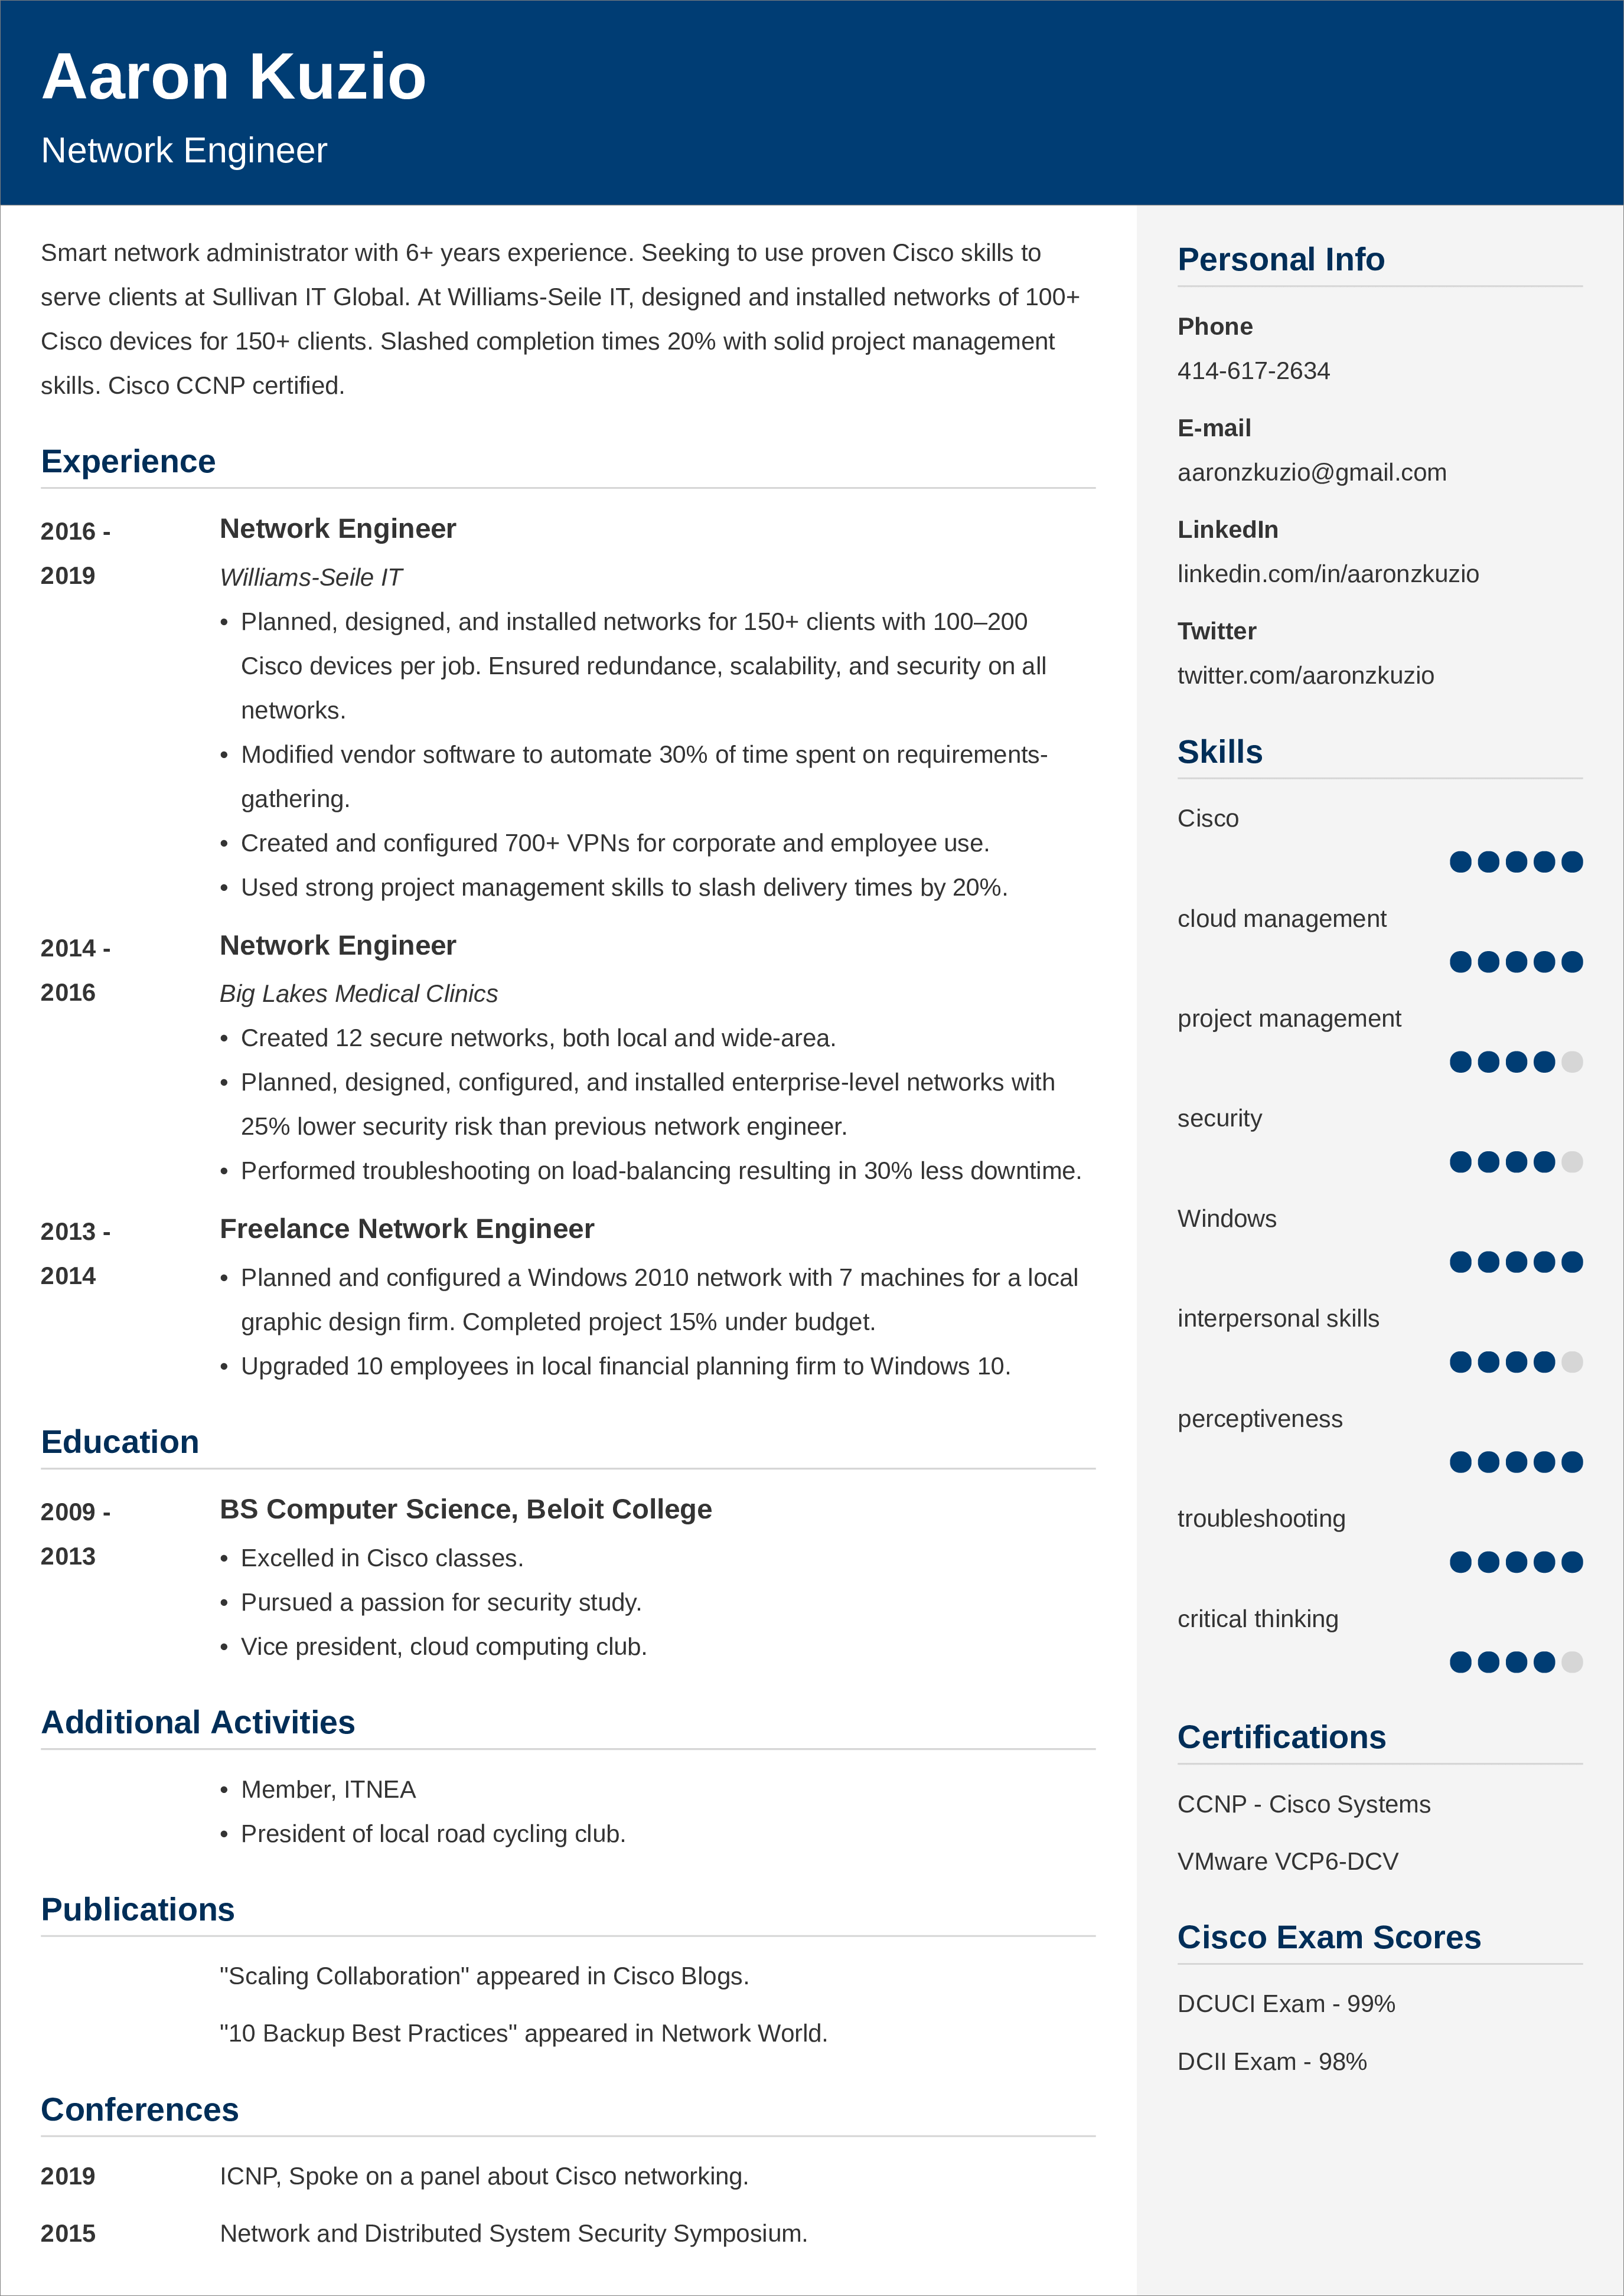 Additional coursework on resume independent